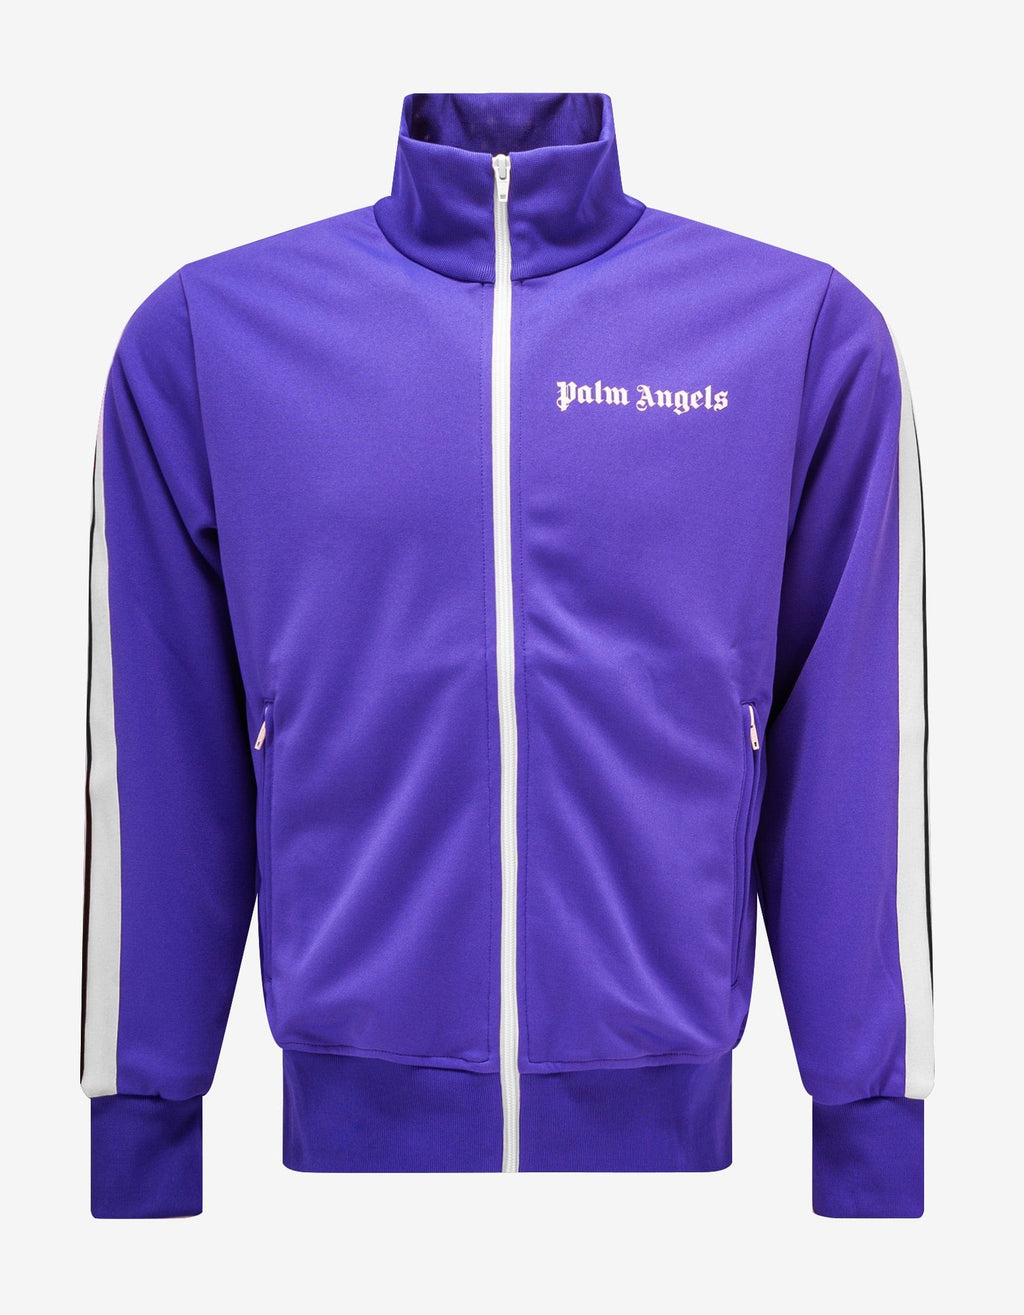 Palm Angels Palm Angels Purple Track Jacket with Stripes